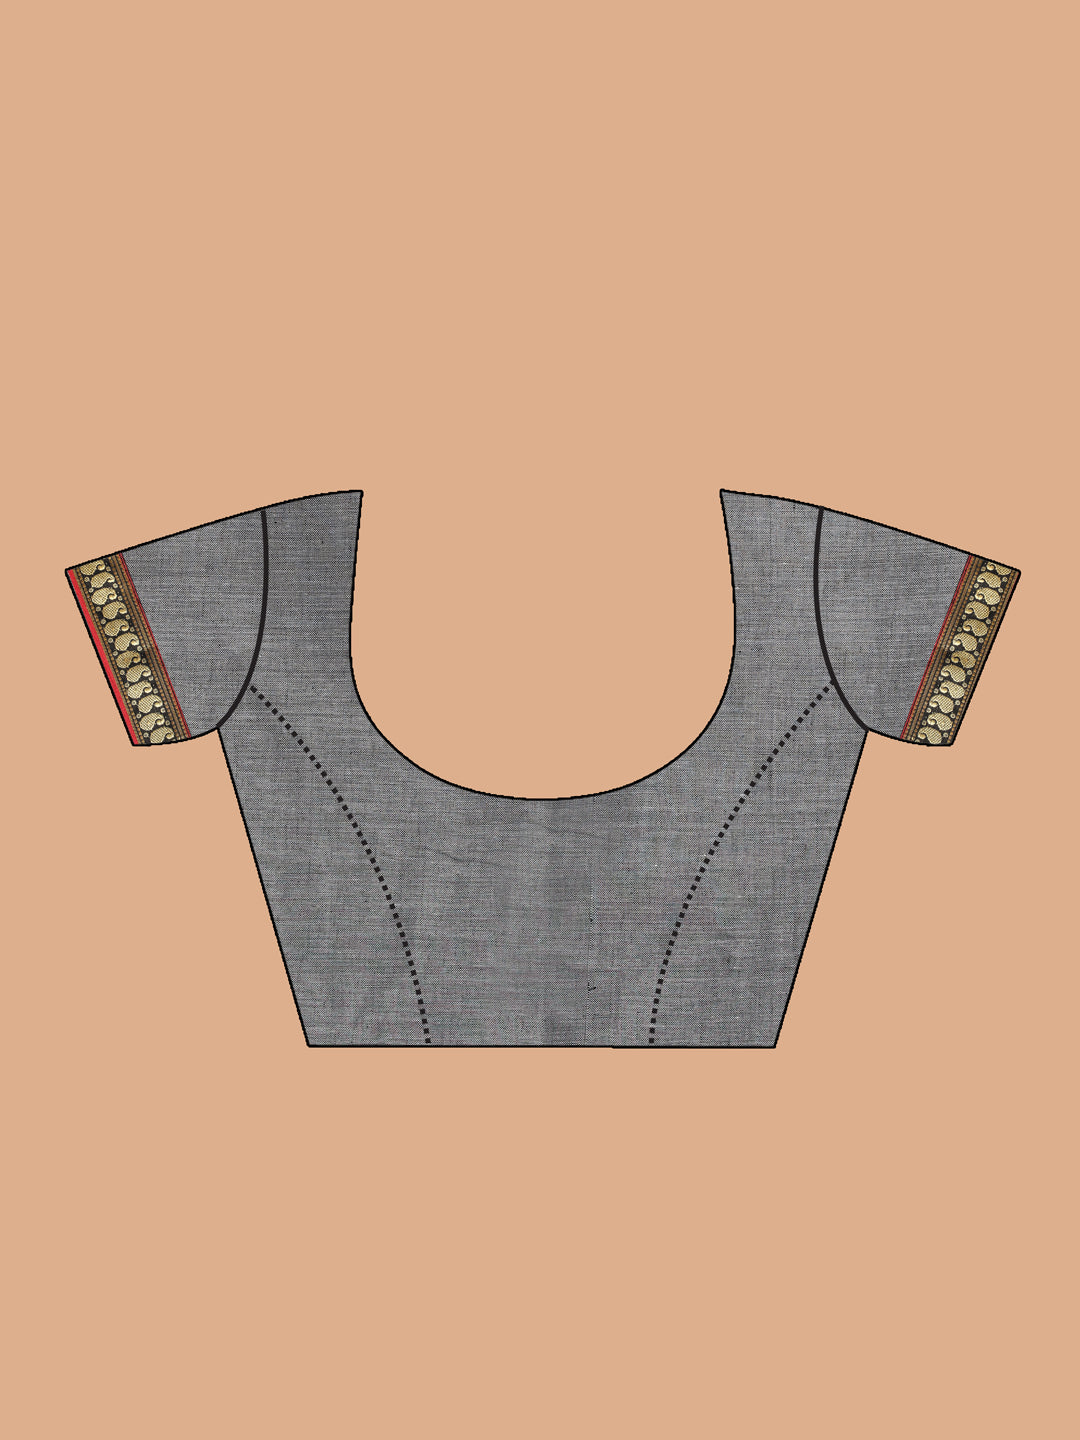 Indethnic Grey Pure Cotton Solid Saree - Blouse Piece View